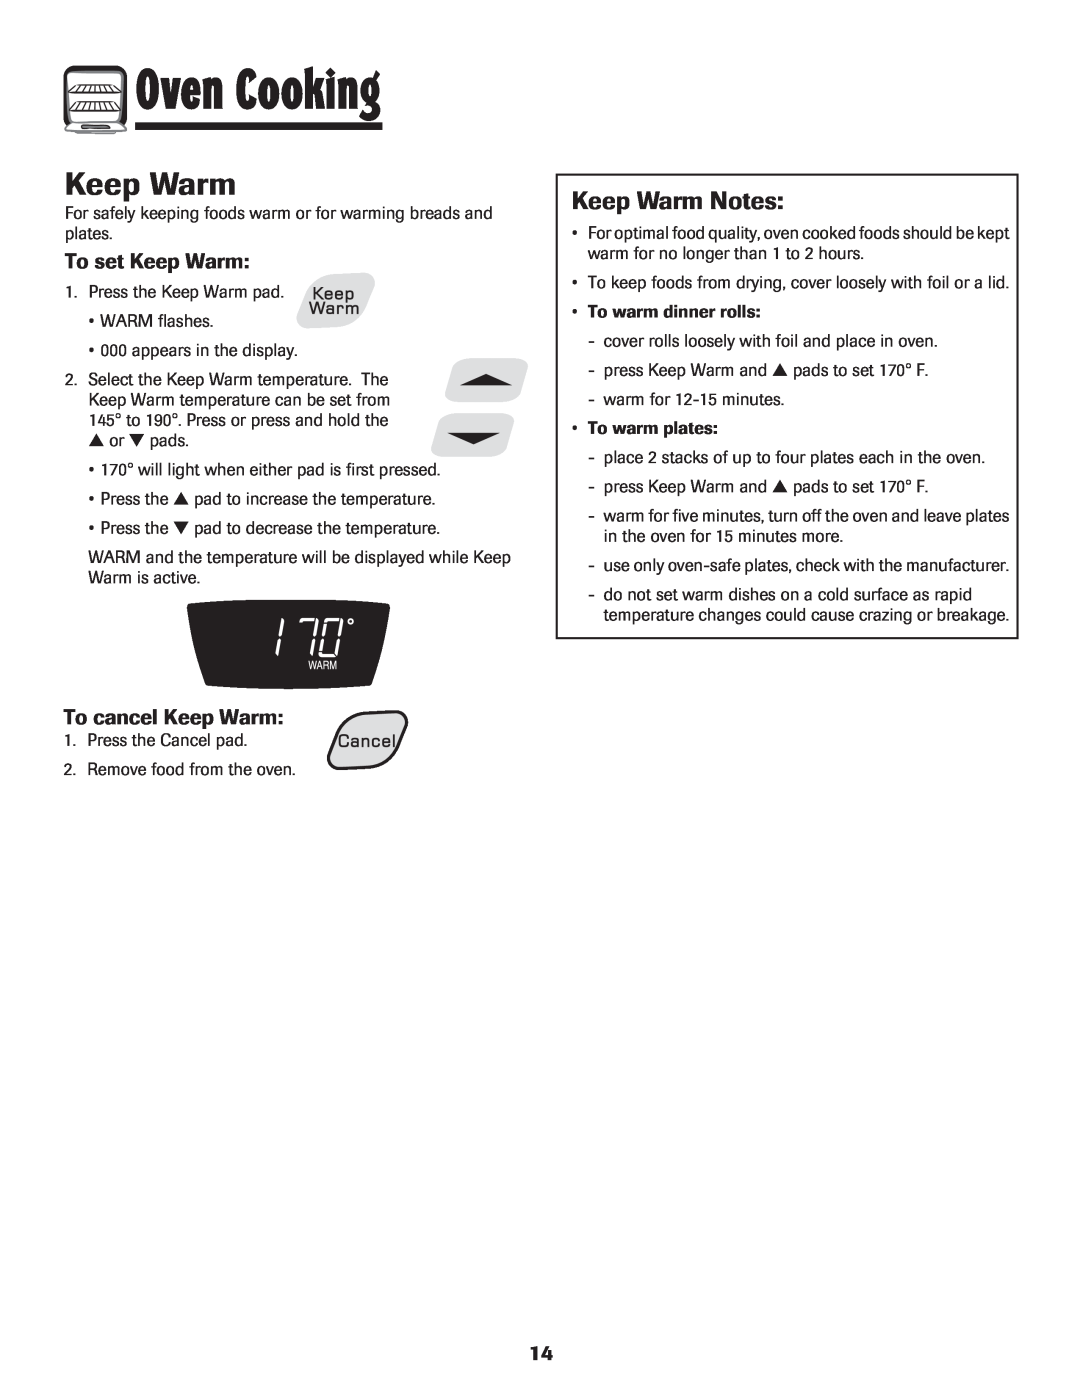 Amana pmn important safety instructions Keep Warm Notes, To set Keep Warm, To cancel Keep Warm, Oven Cooking 